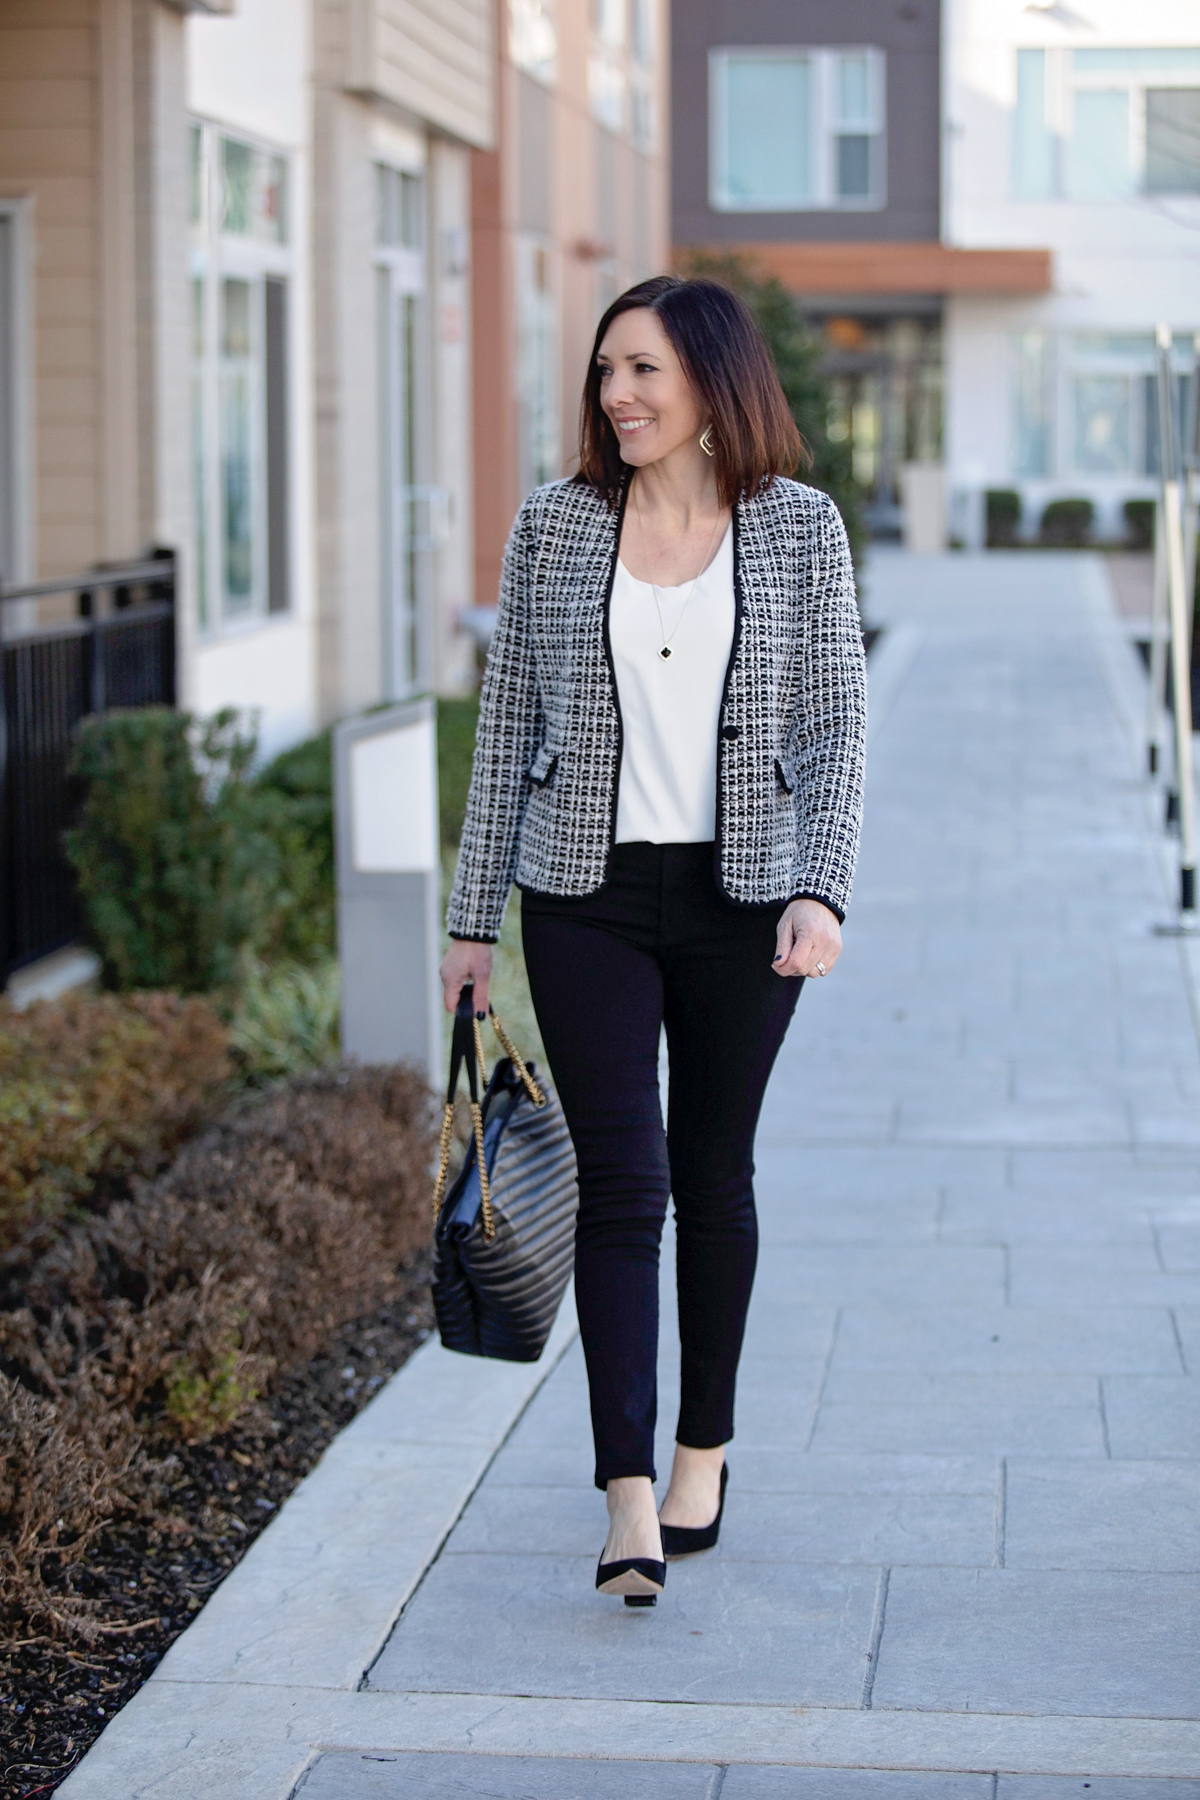 Classy Tweed Jacket Outfit for Date Night or Business Casual Events